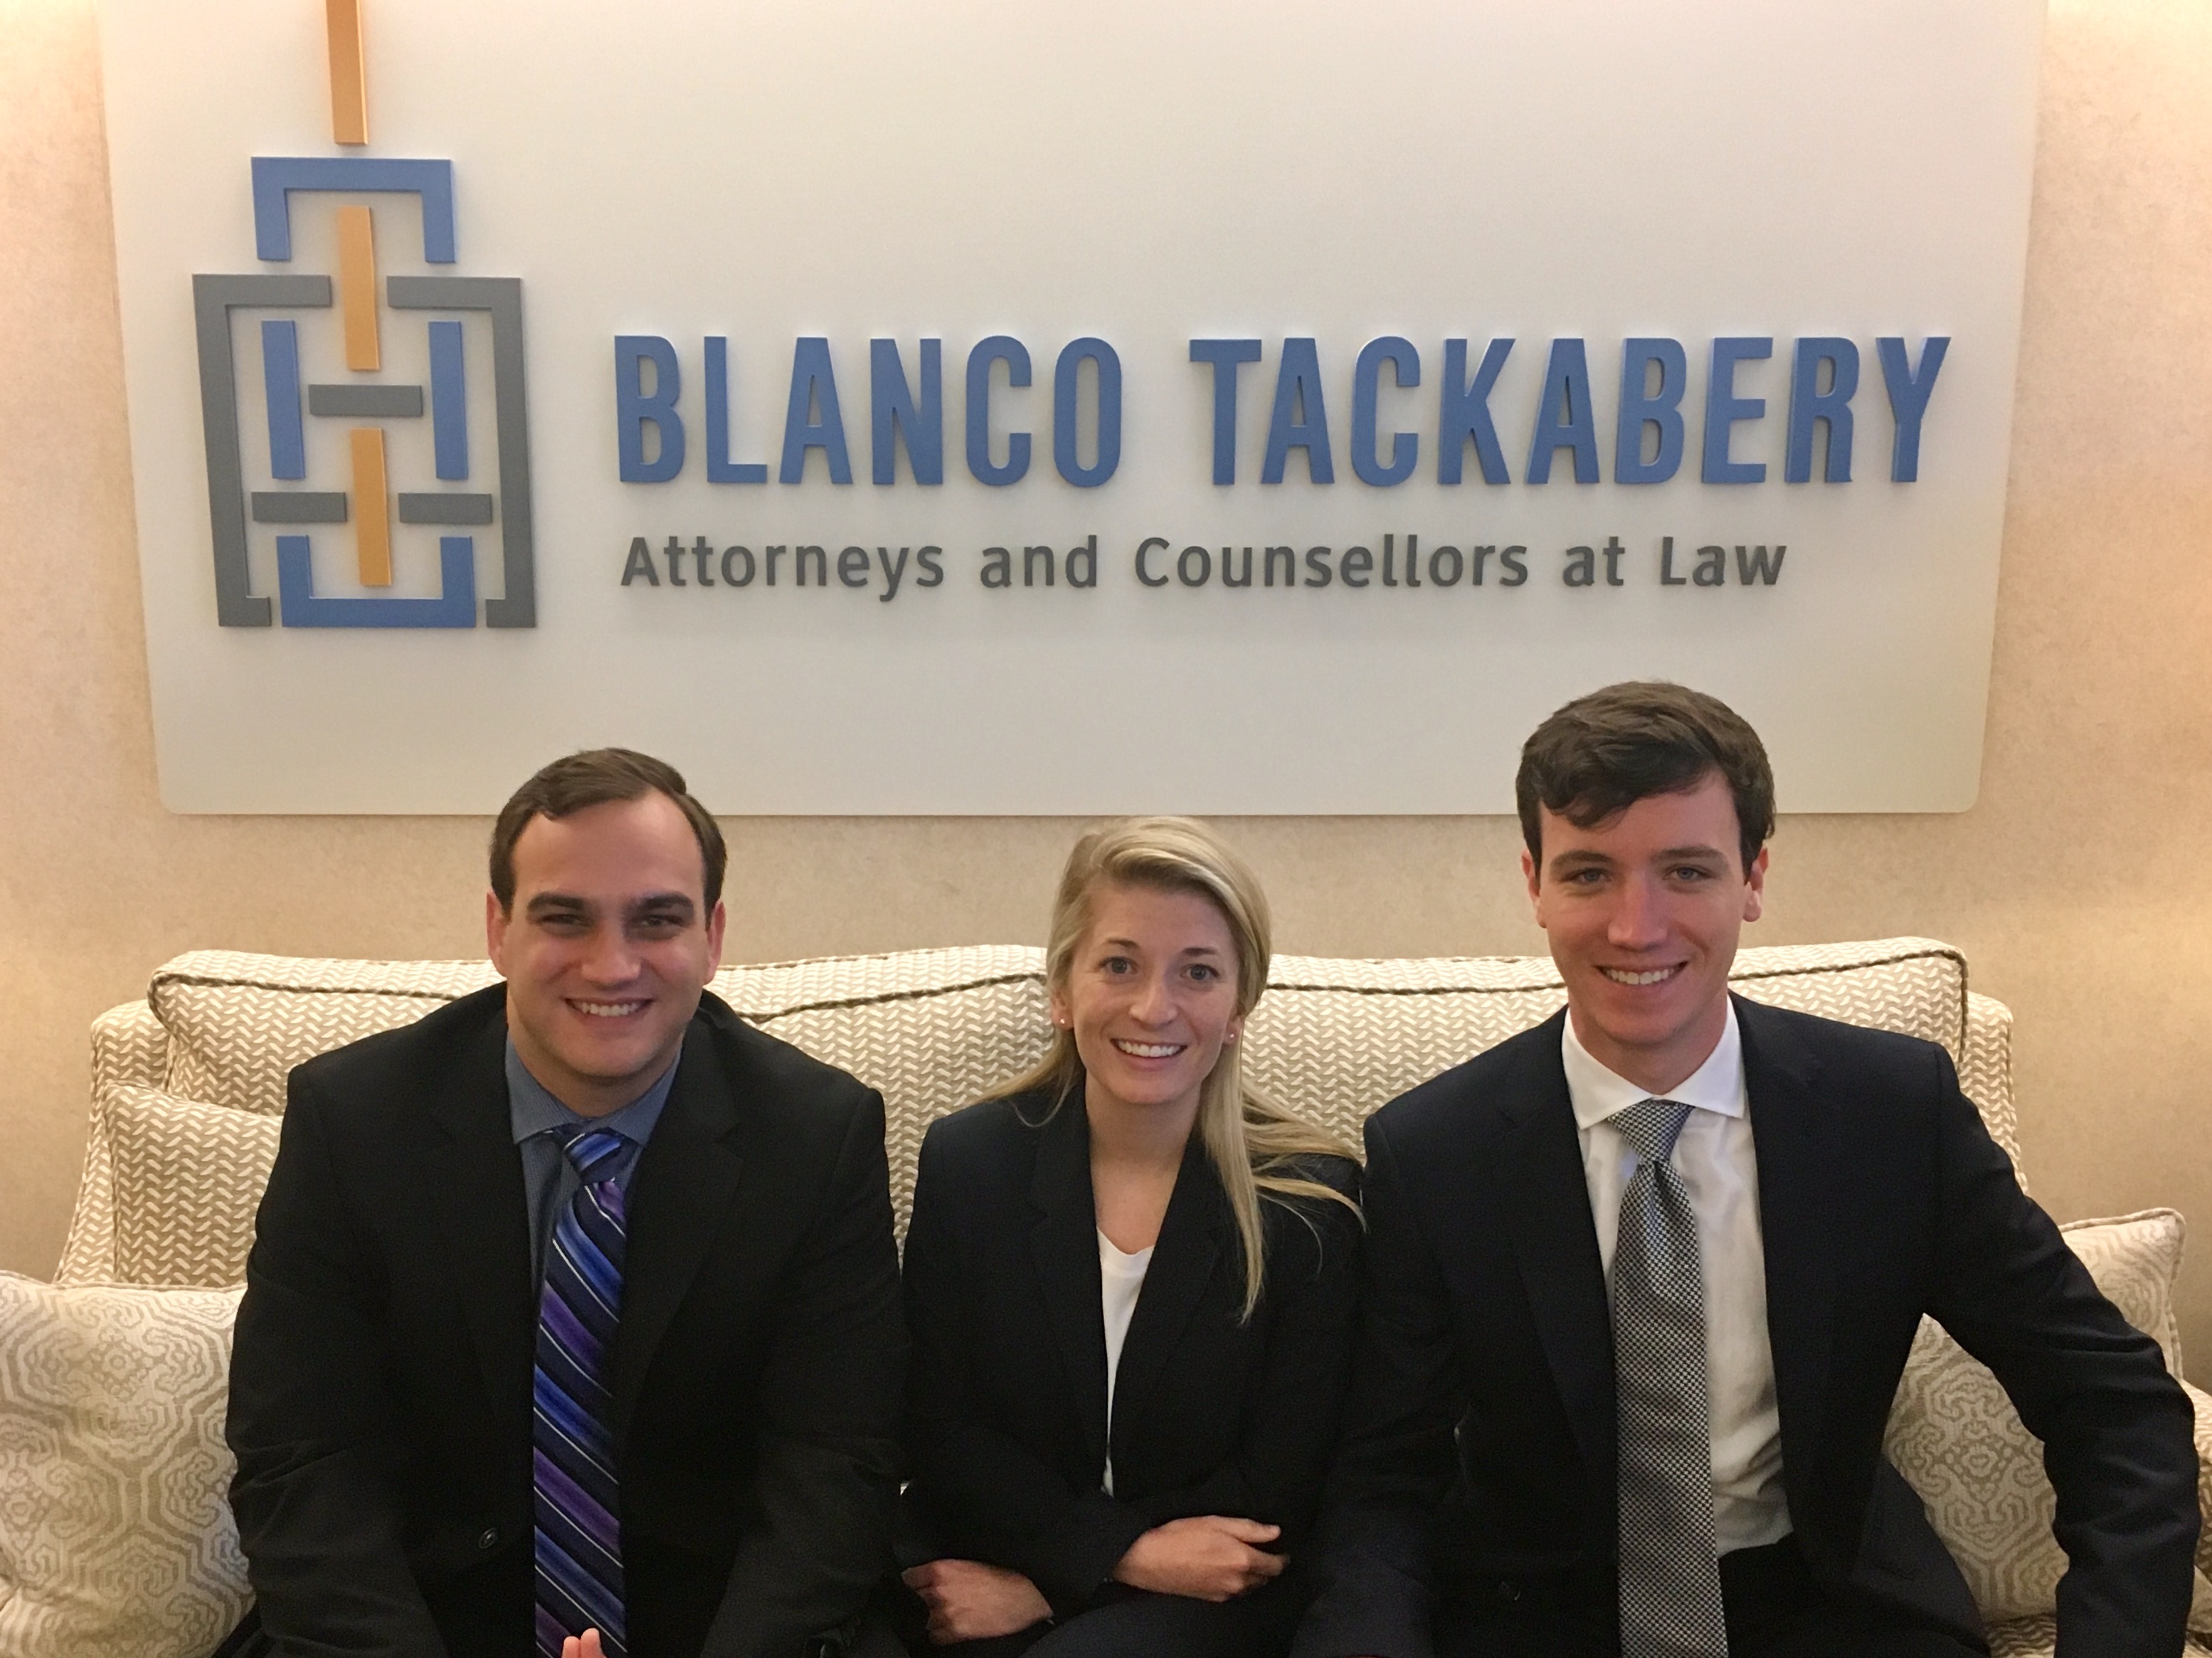 Blanco Tackabery Welcomes Our Summer Associates